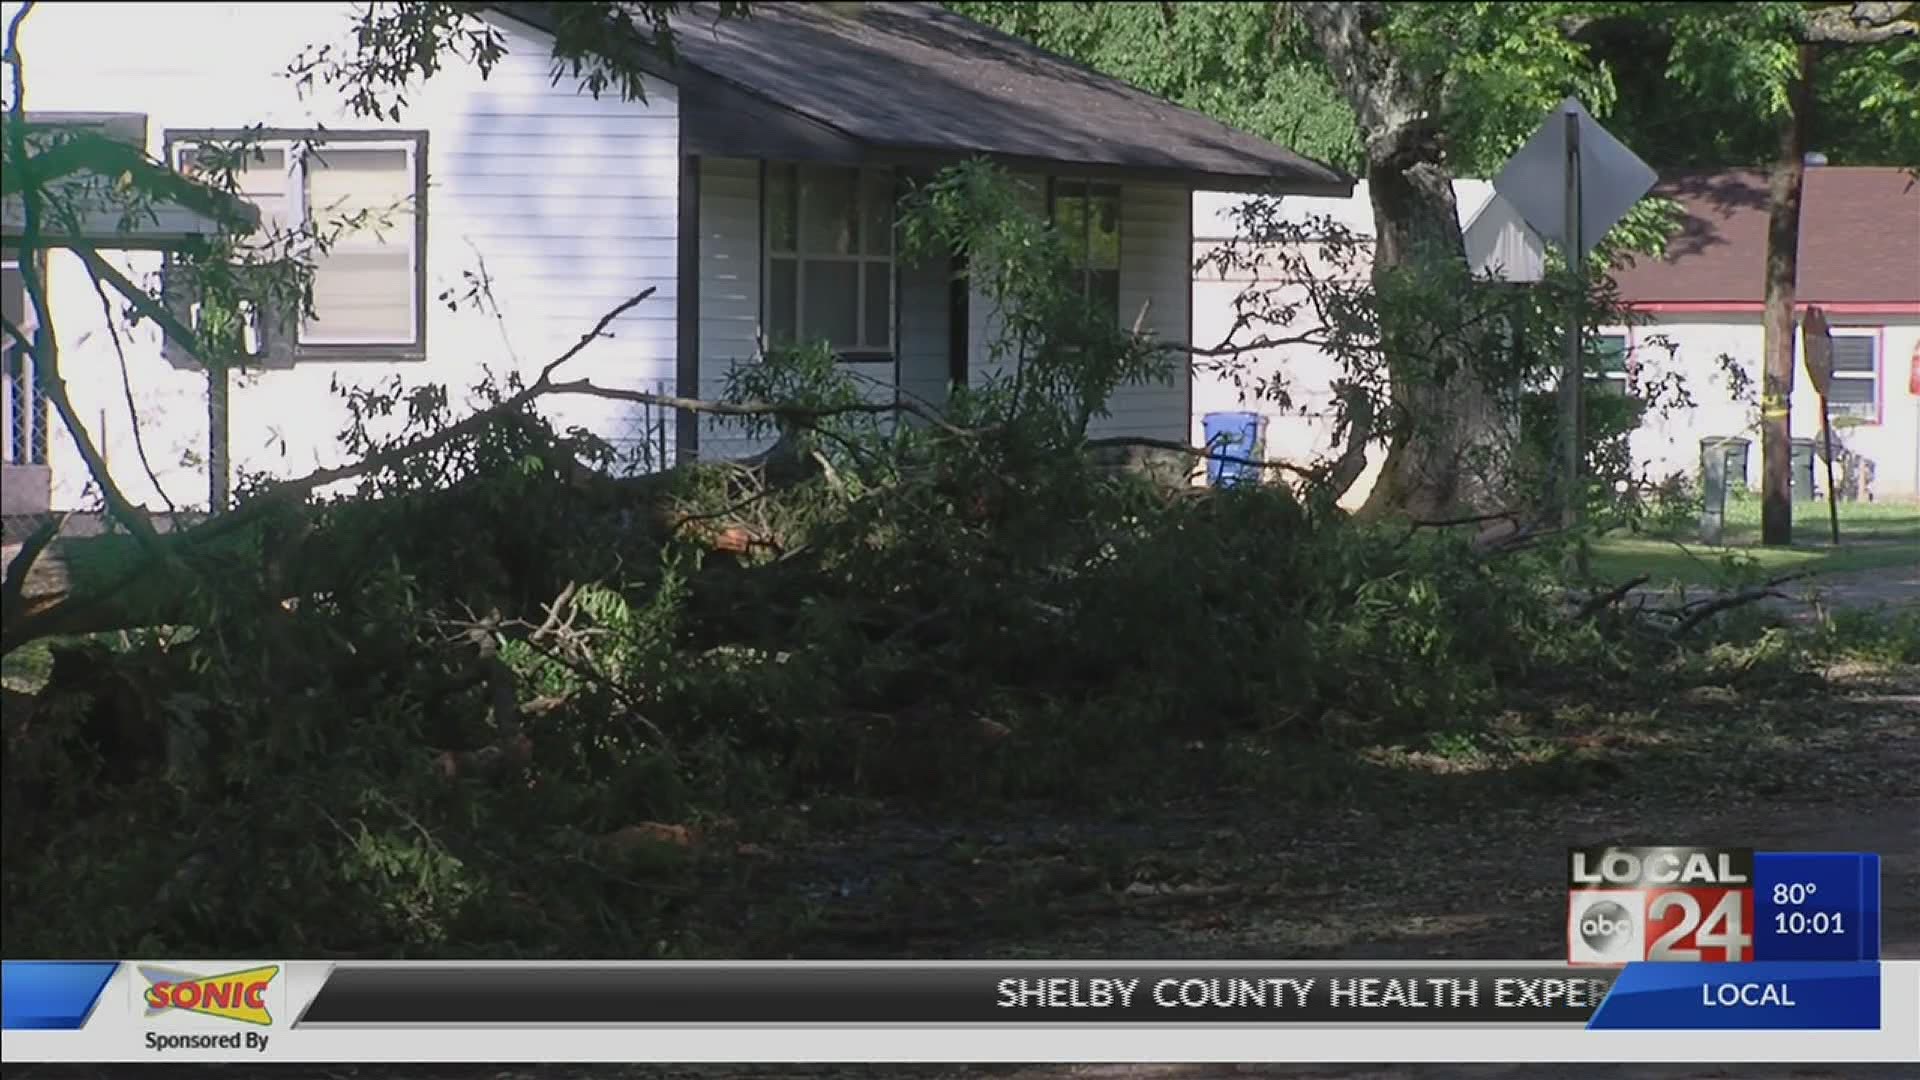 In Crittenden County, Arkansas many resident are still without power spending the day outside clearing debris.